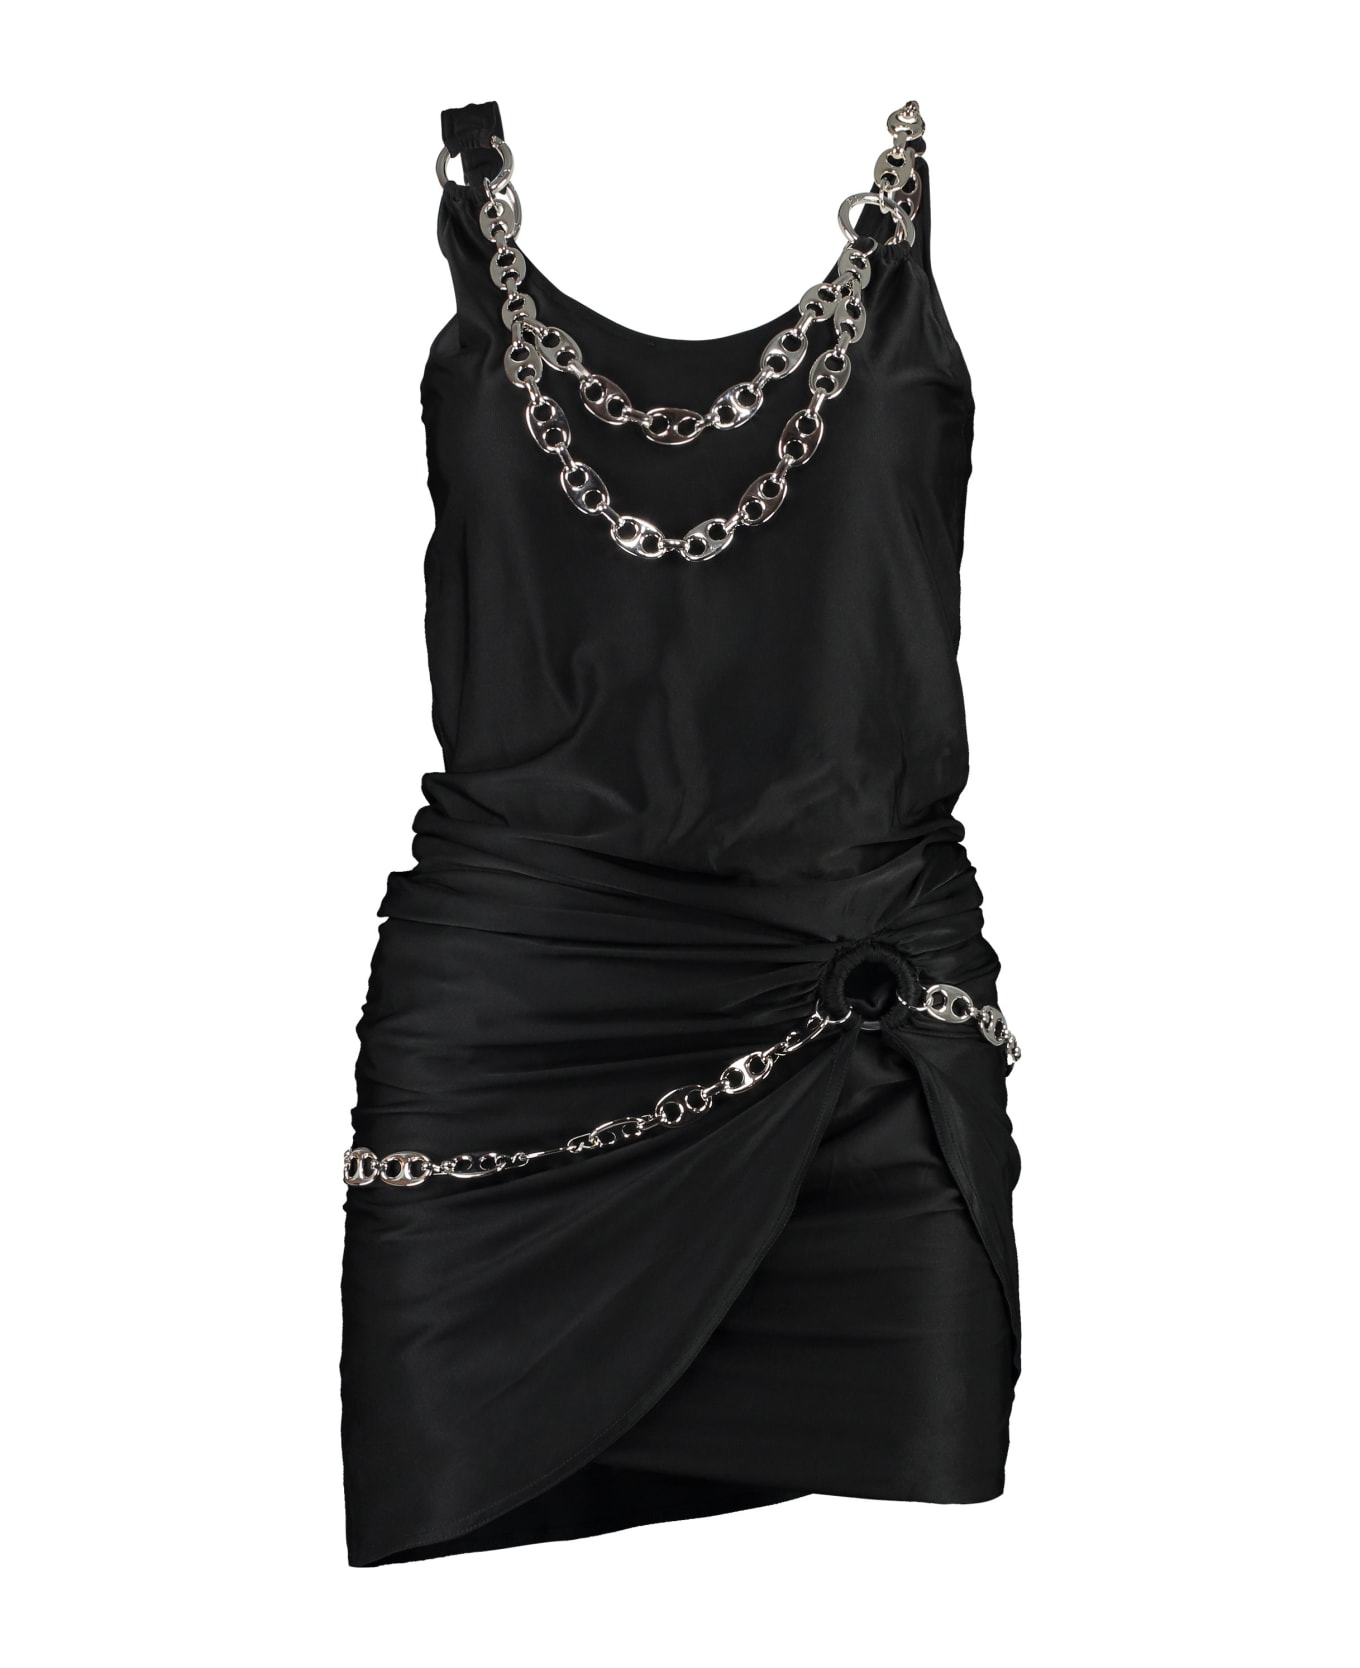 Paco Rabanne Dress With Chains - black